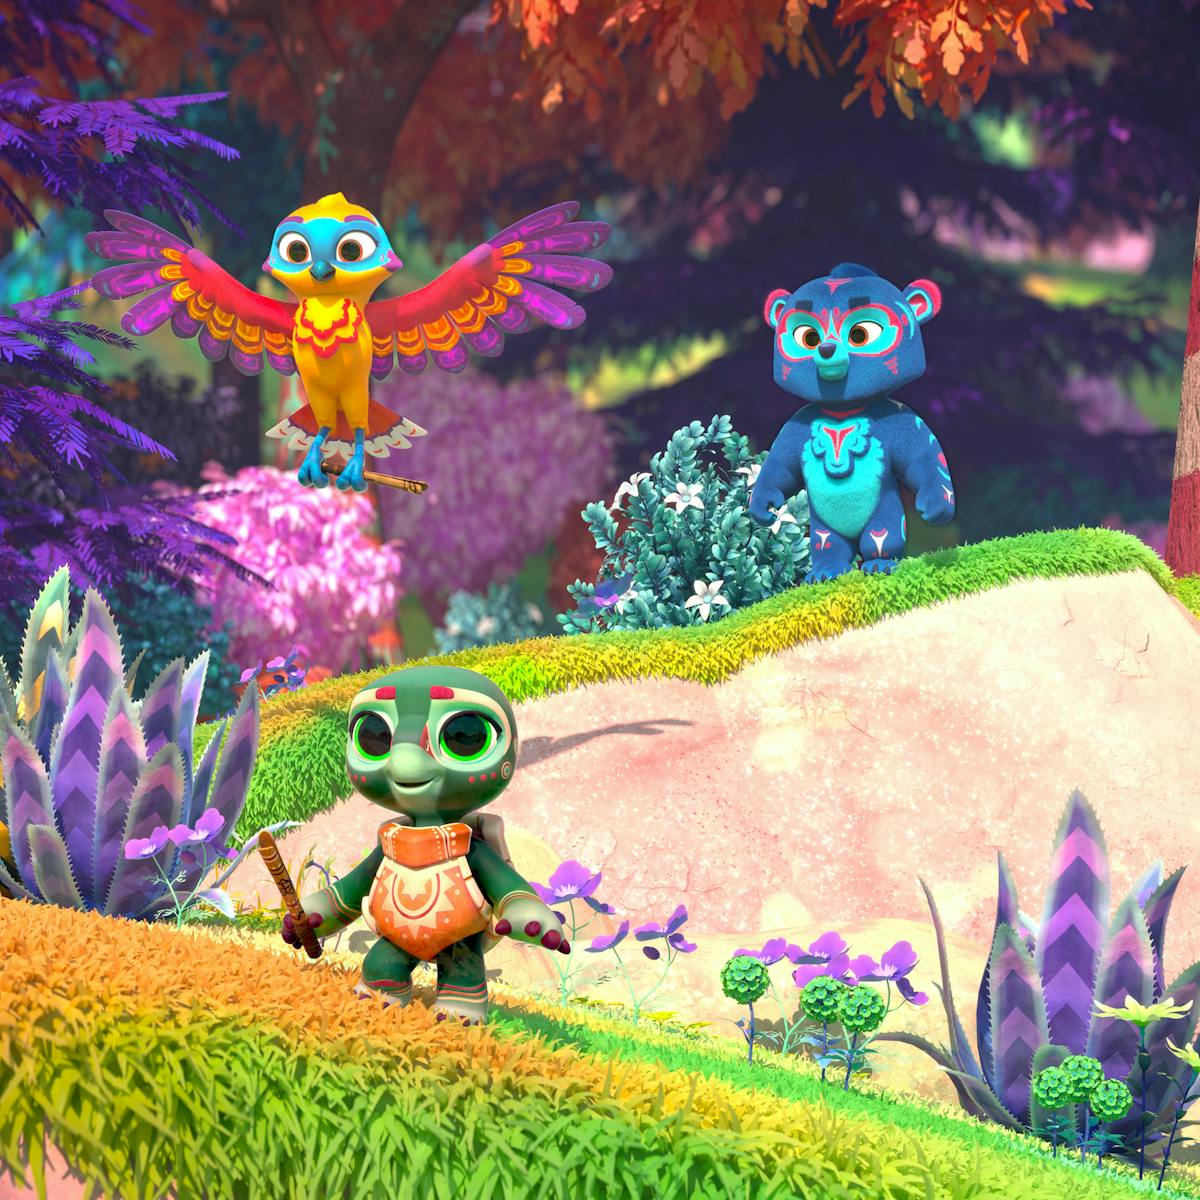 Hawk, bear and turtle from Spirit Rangers play in a vibrantly colored world.